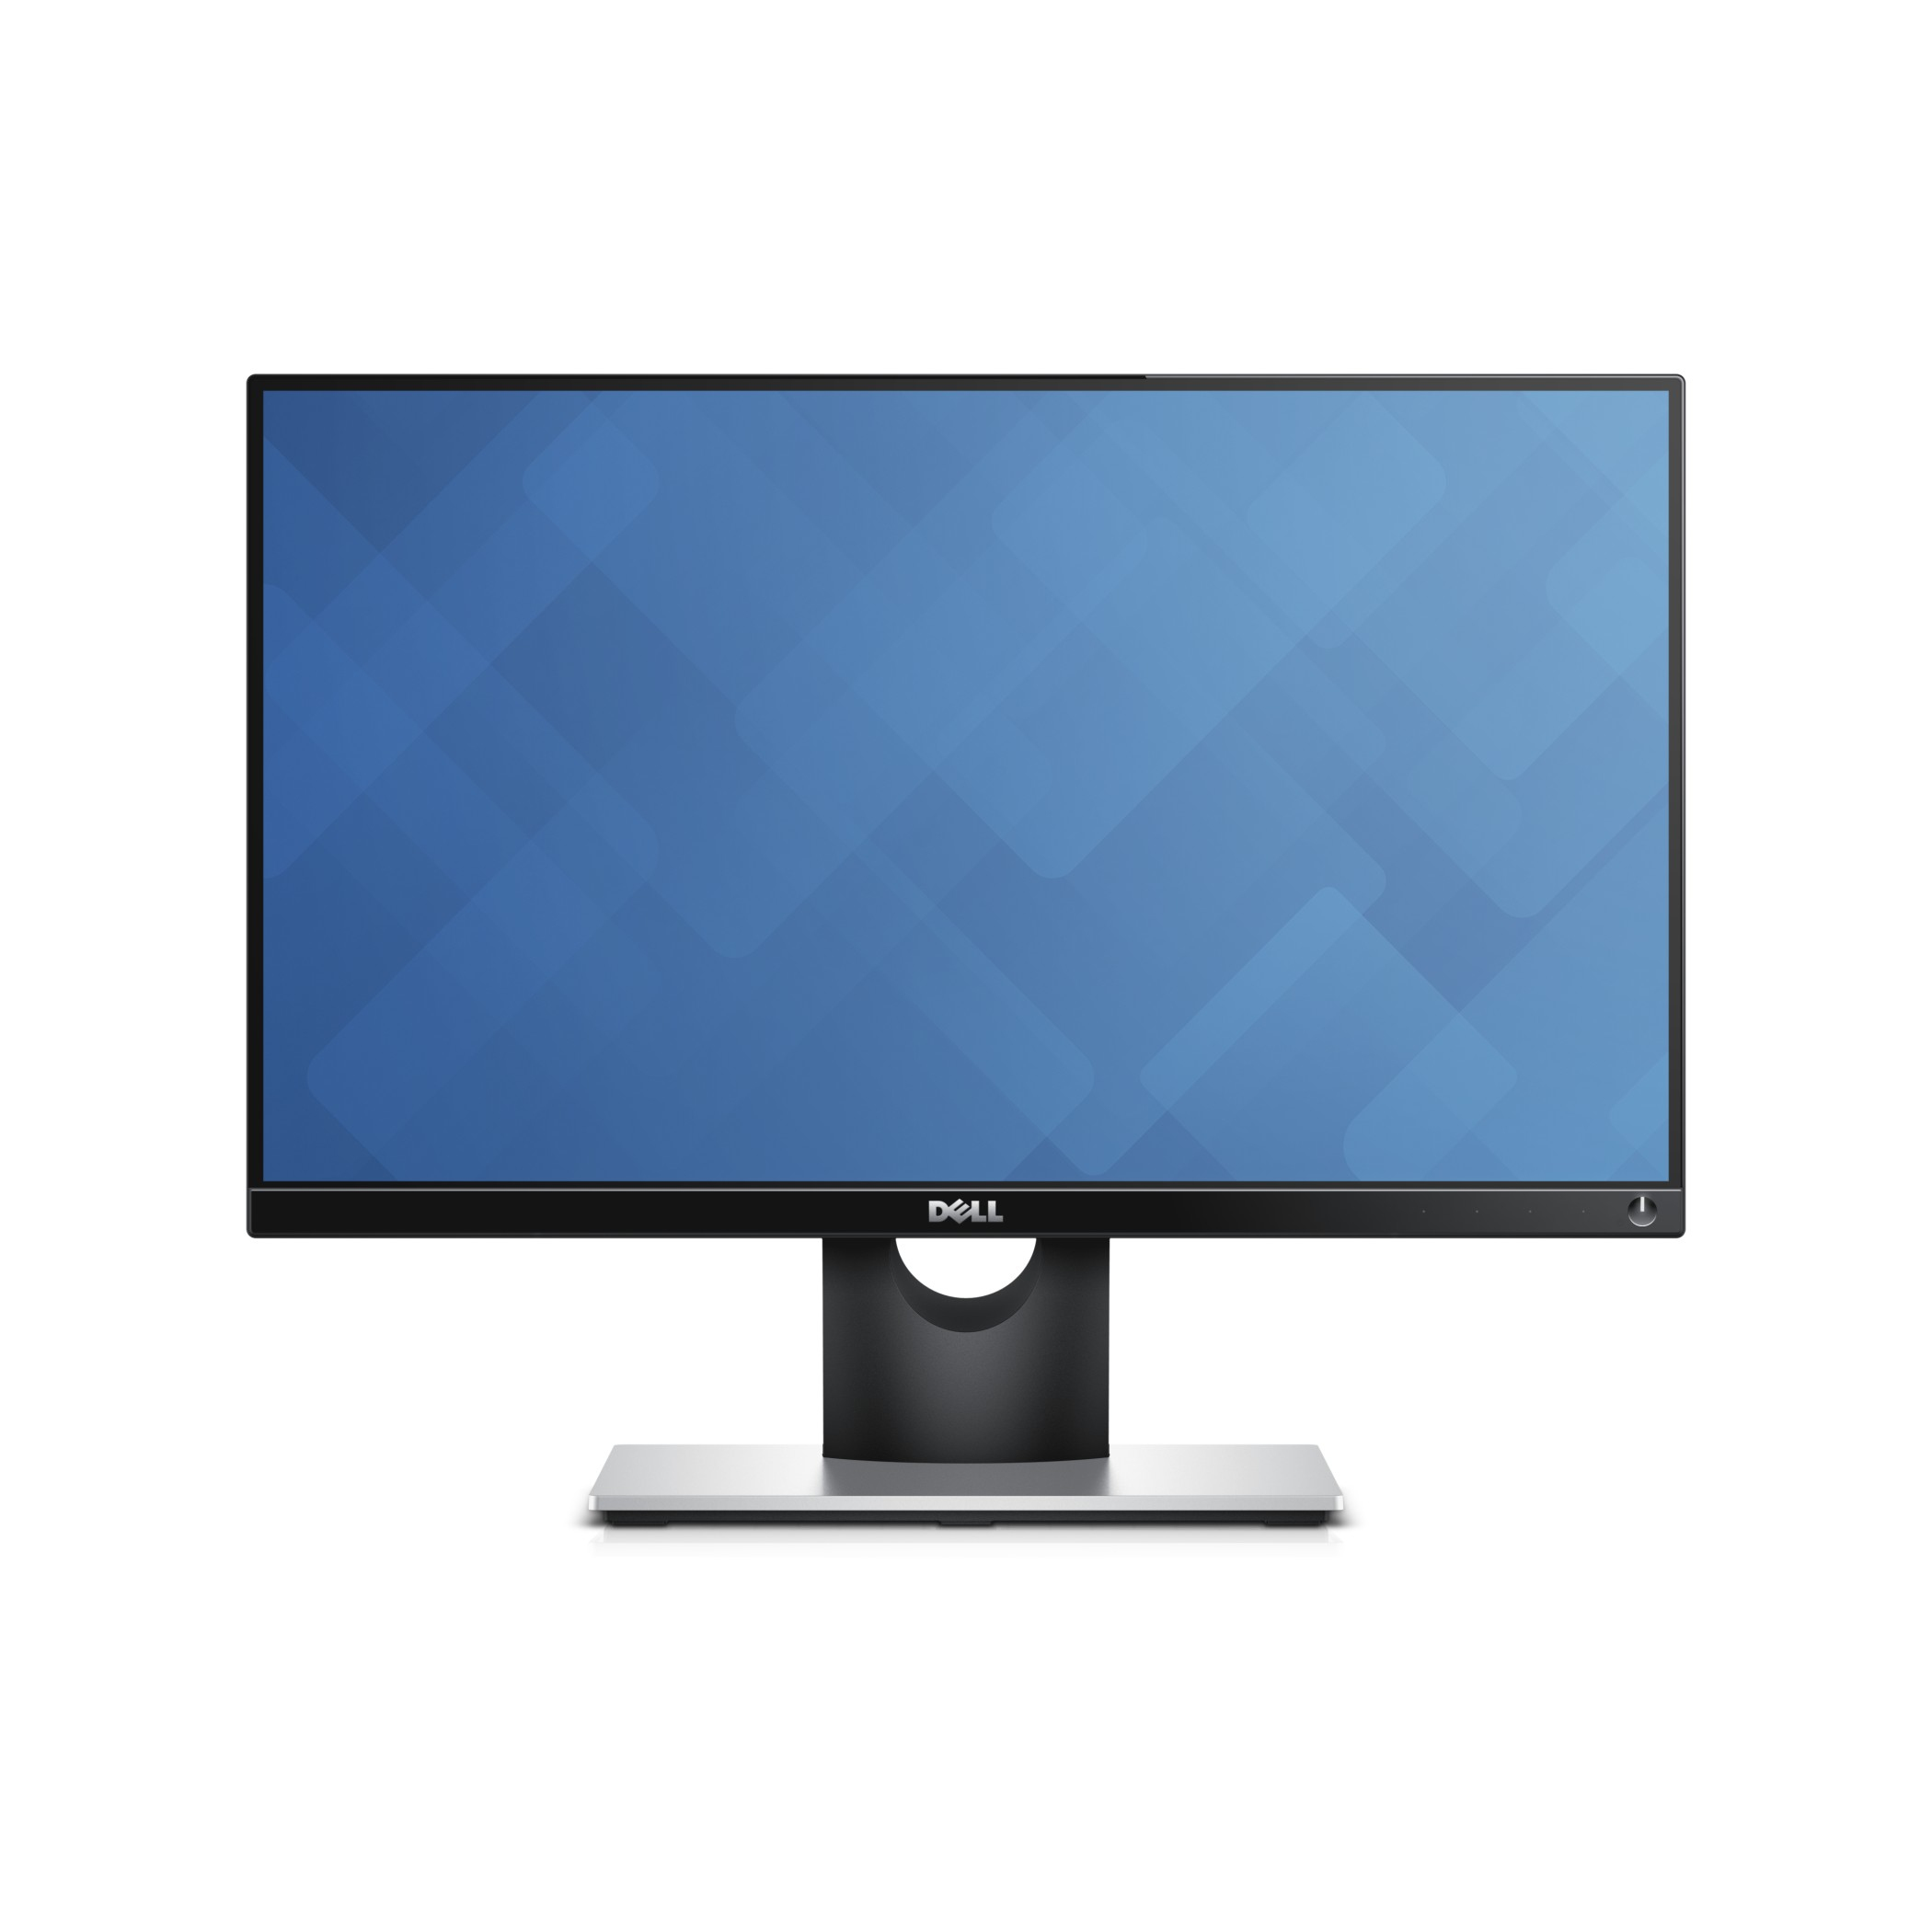 DELL S Series S2216H LED display